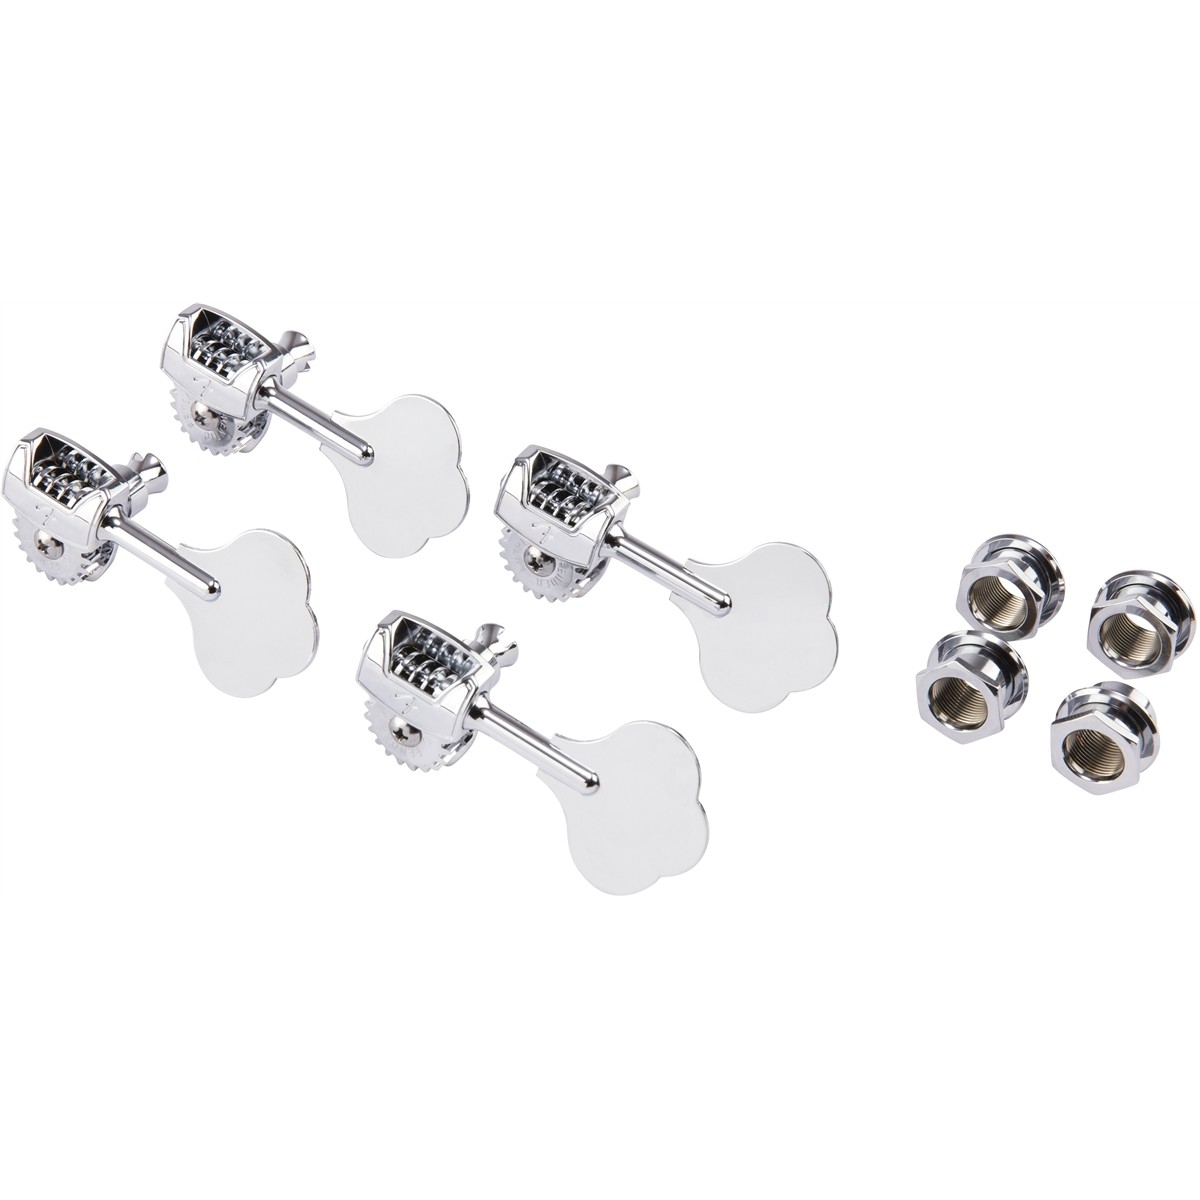 Fender Parts Deluxe Bass Tuners with Fluted-Shafts (4) Chrome 0992006000